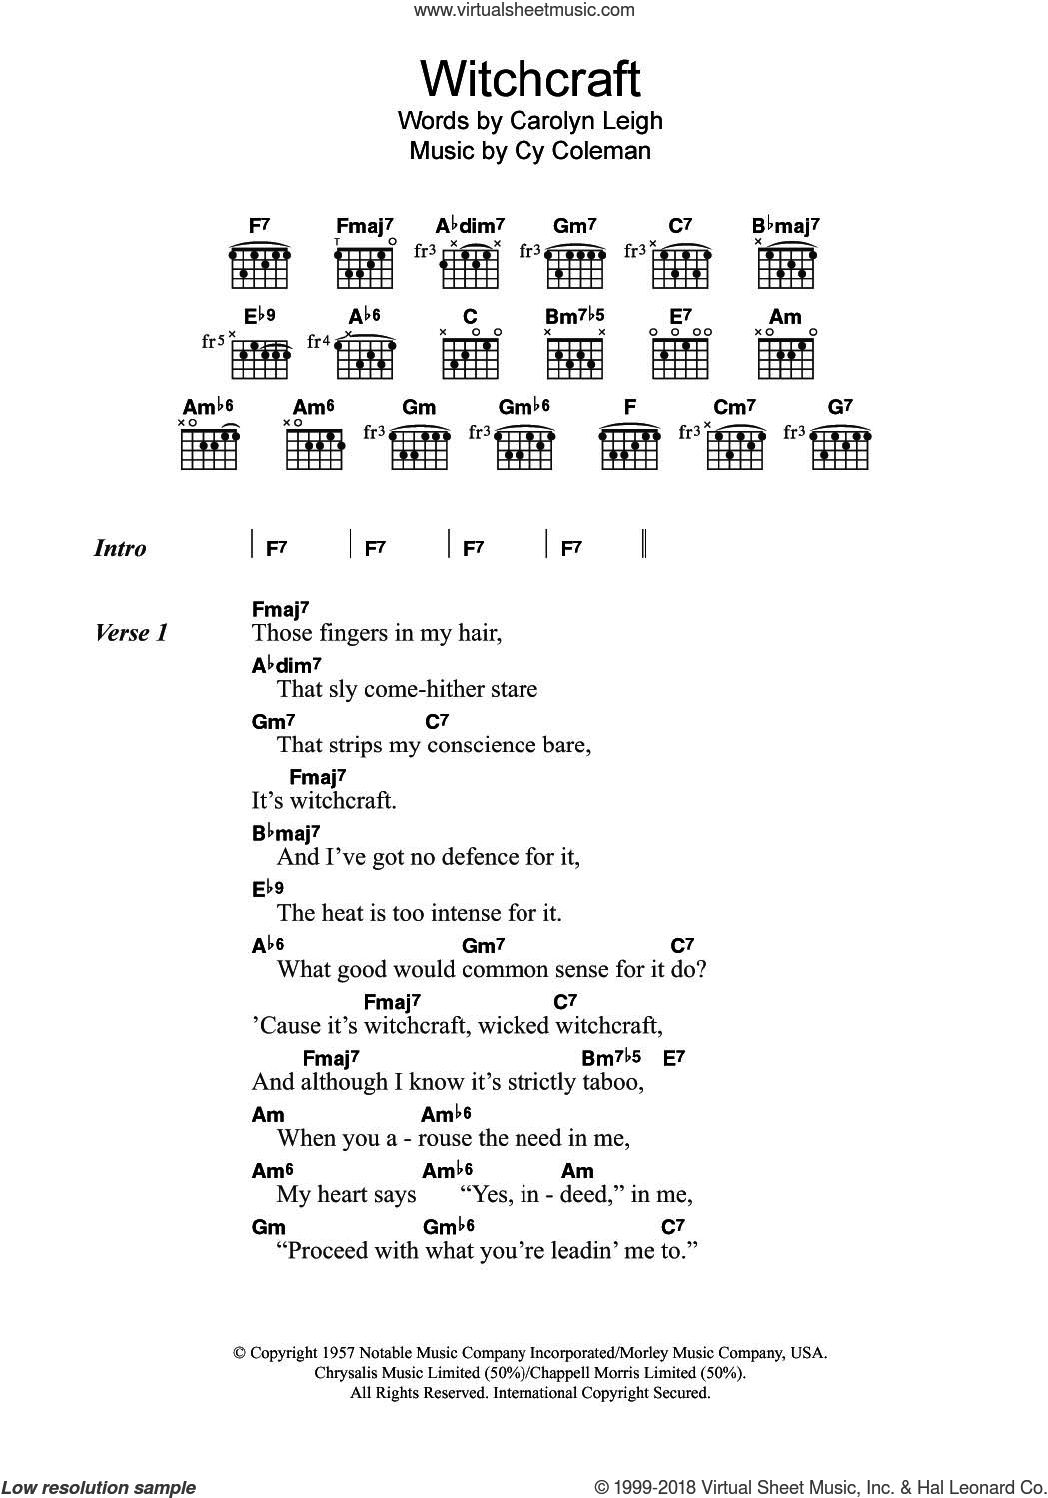 Sinatra - Witchcraft sheet music for guitar (chords) (PDF)